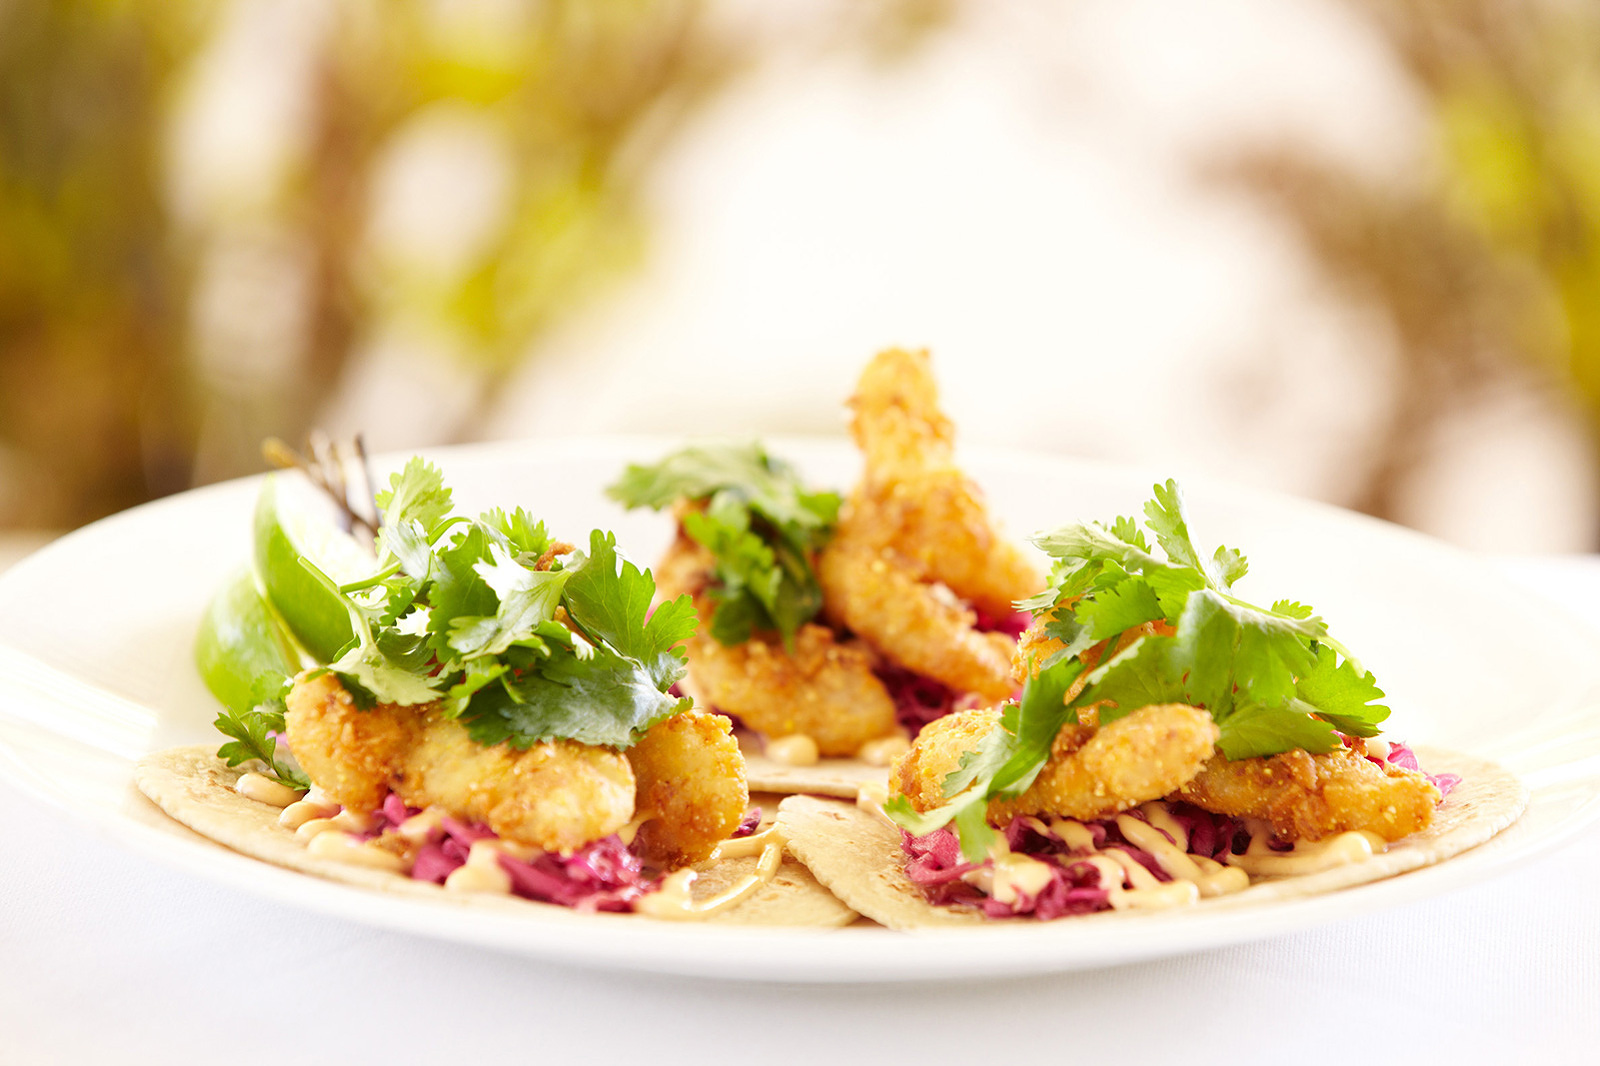 Fish Tacos at Solbar in Napa Valley, CA  | Trinette+Chris Photographers